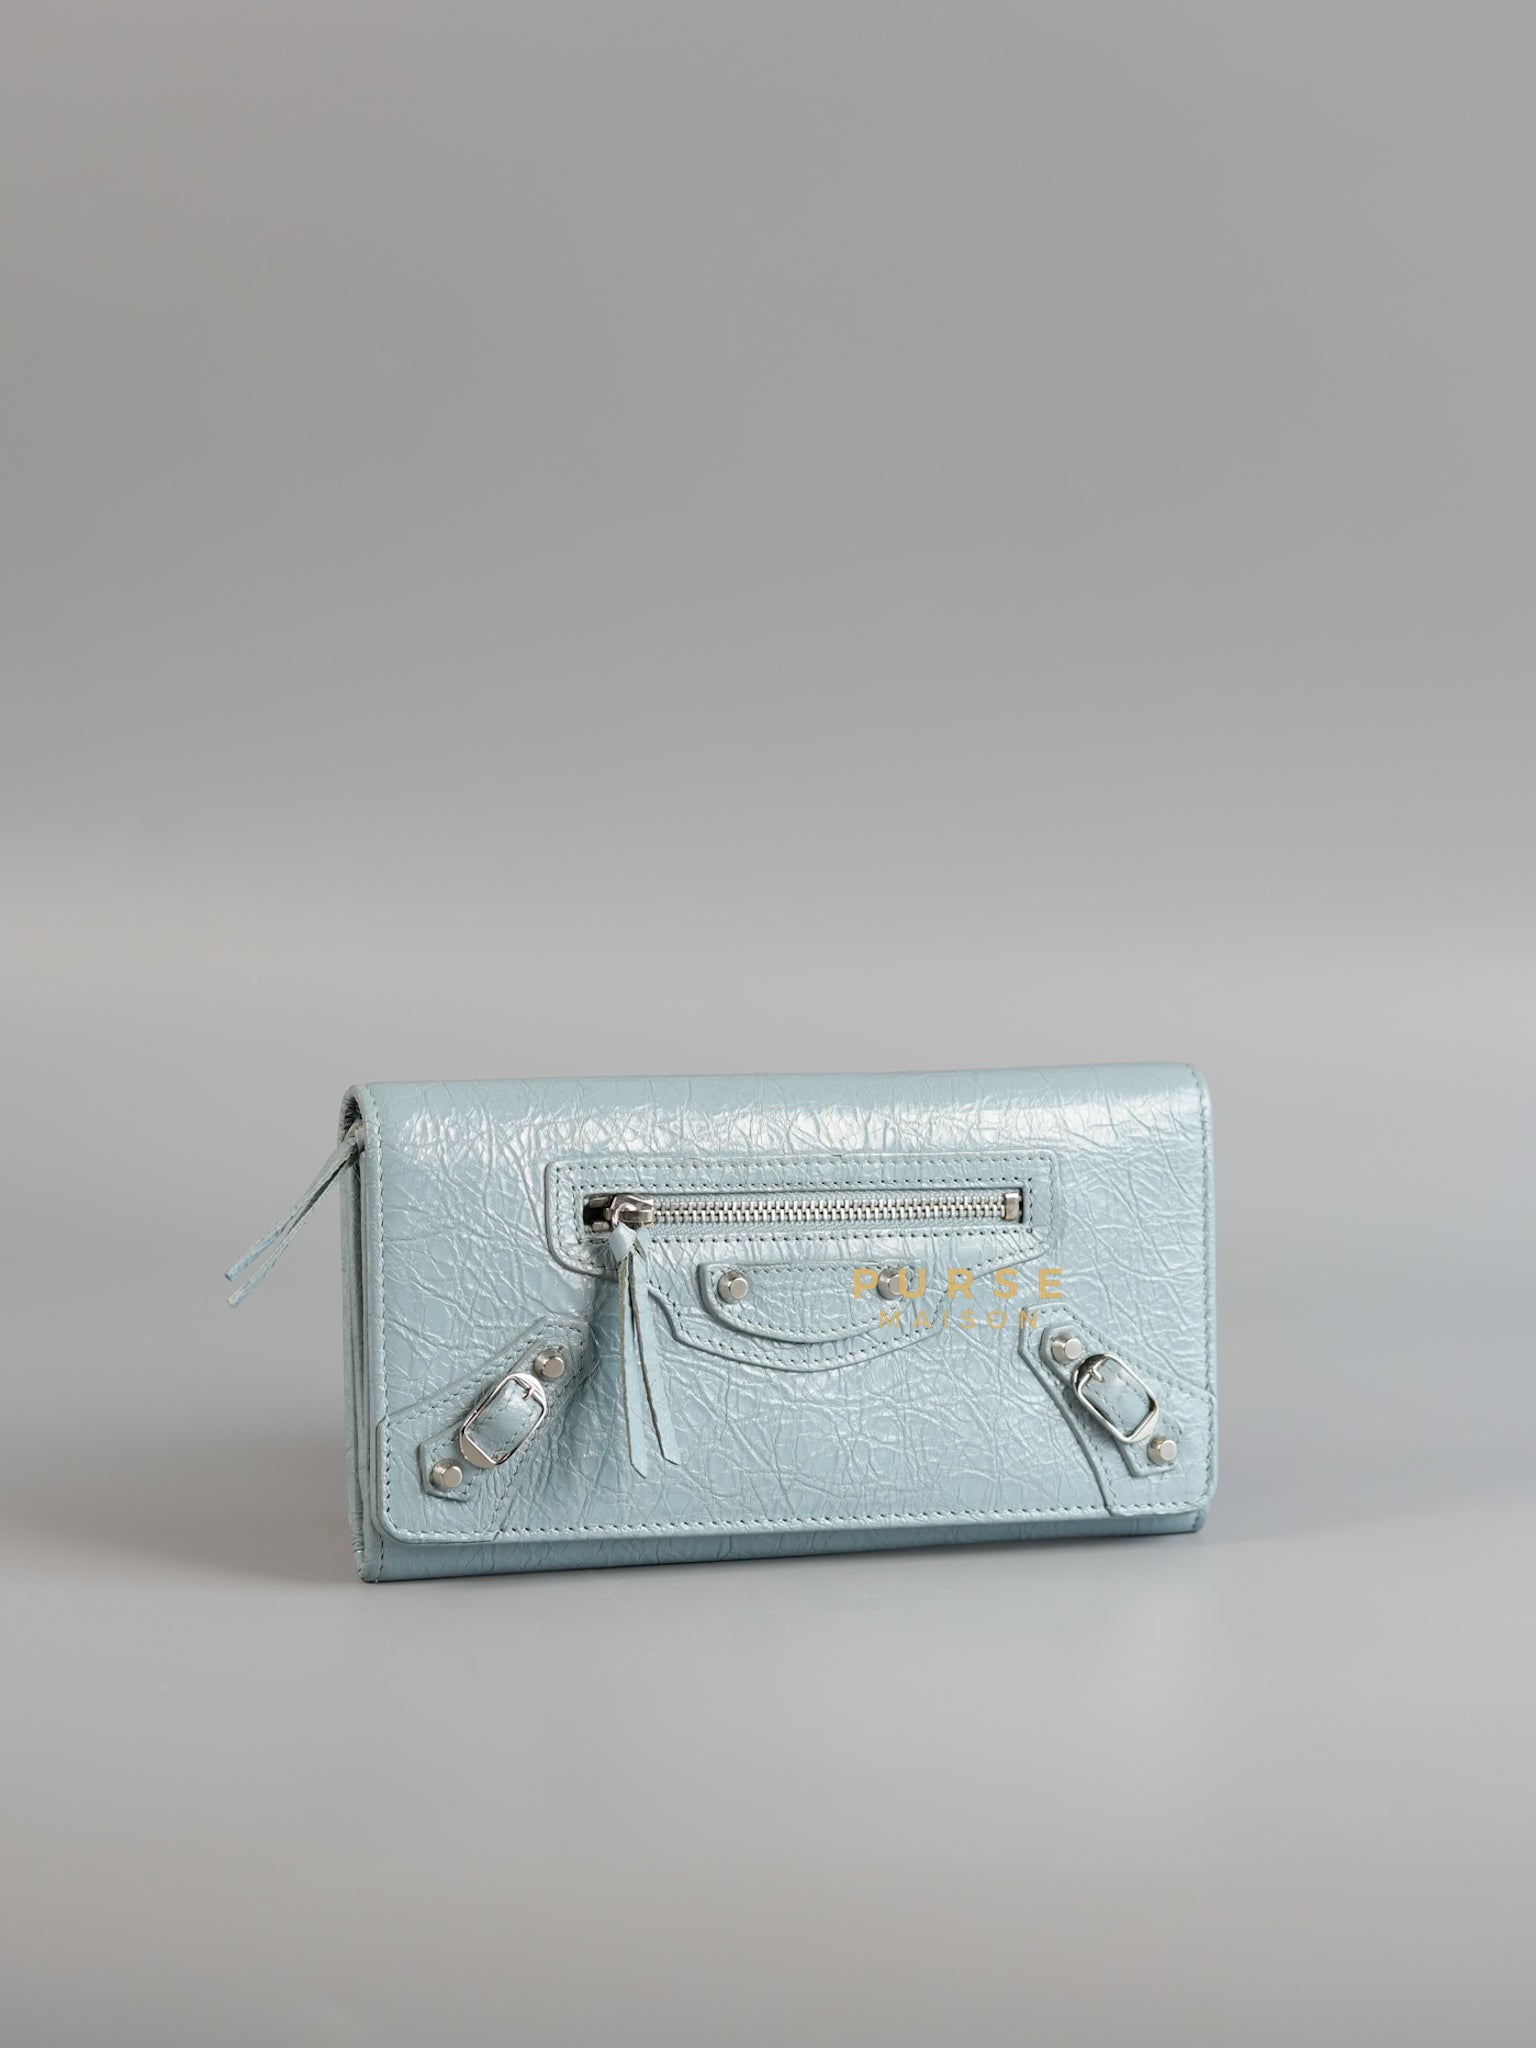 Continental City Long Wallet in Light Blue Leather | Purse Maison Luxury Bags Shop